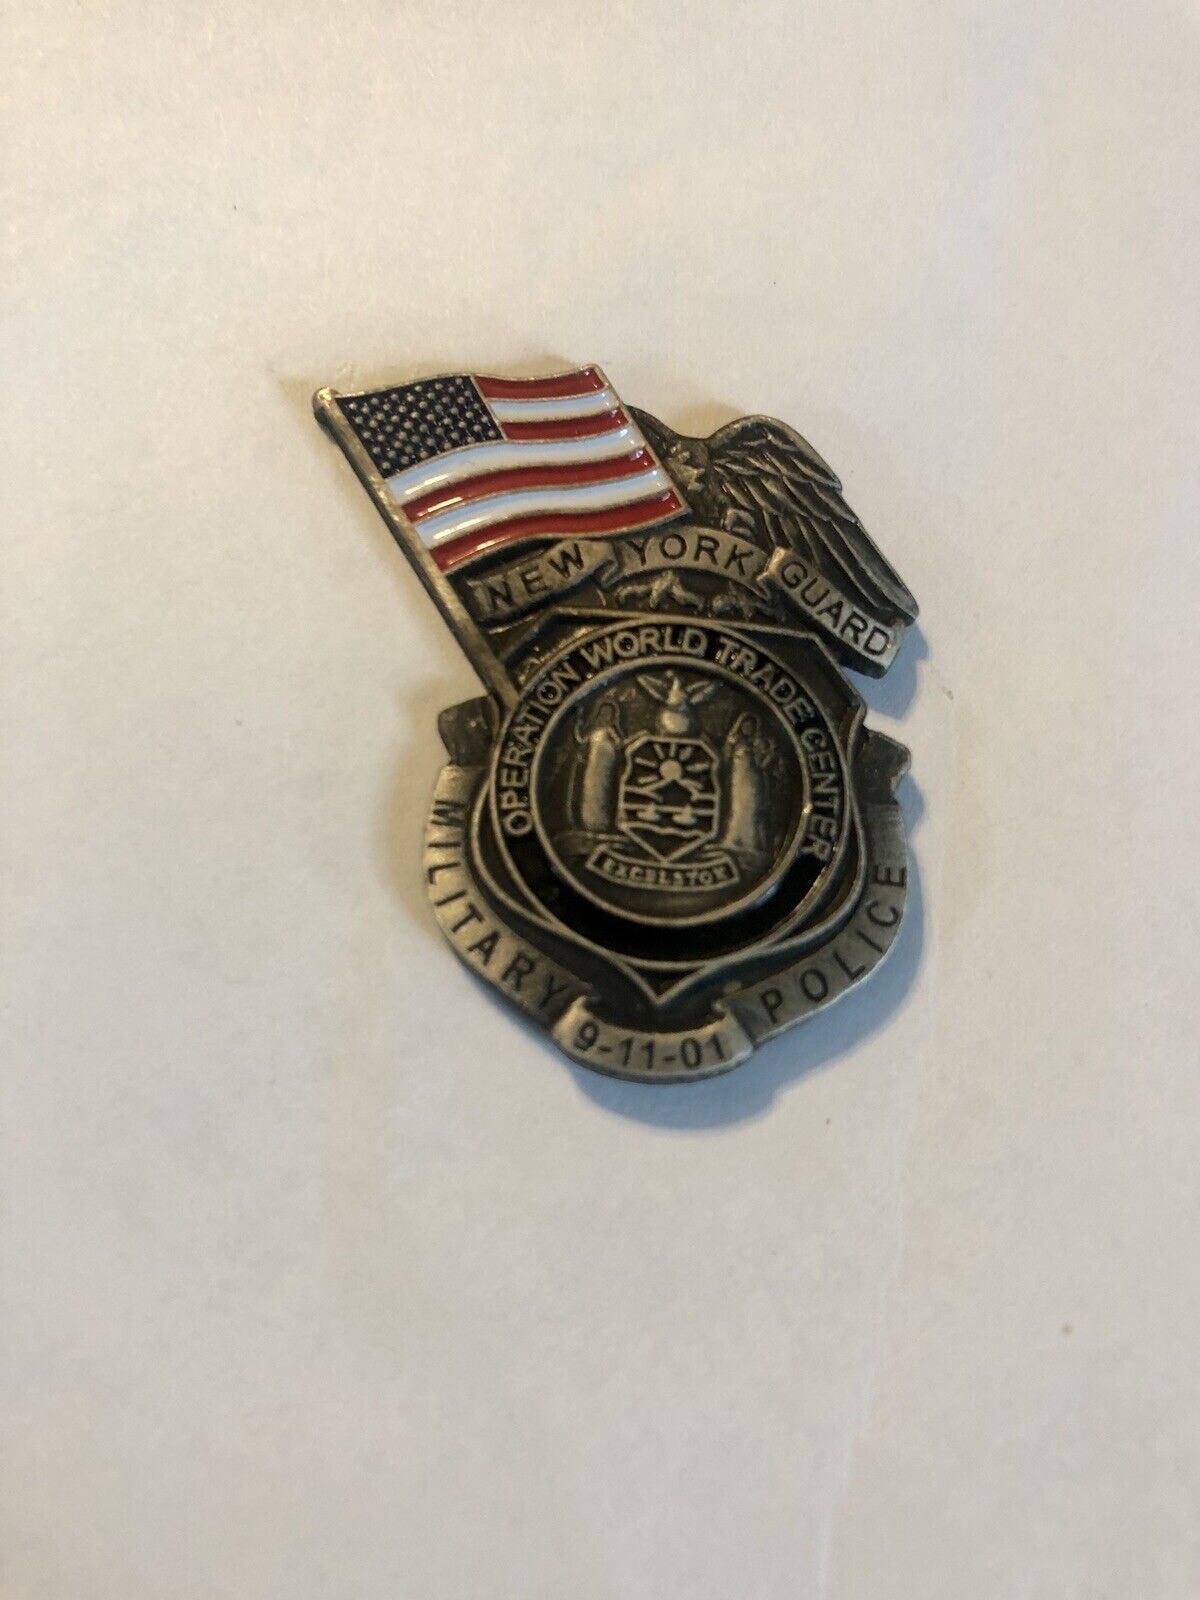 New York Guard Military Police 9/11 Operation World Trade Center Pin